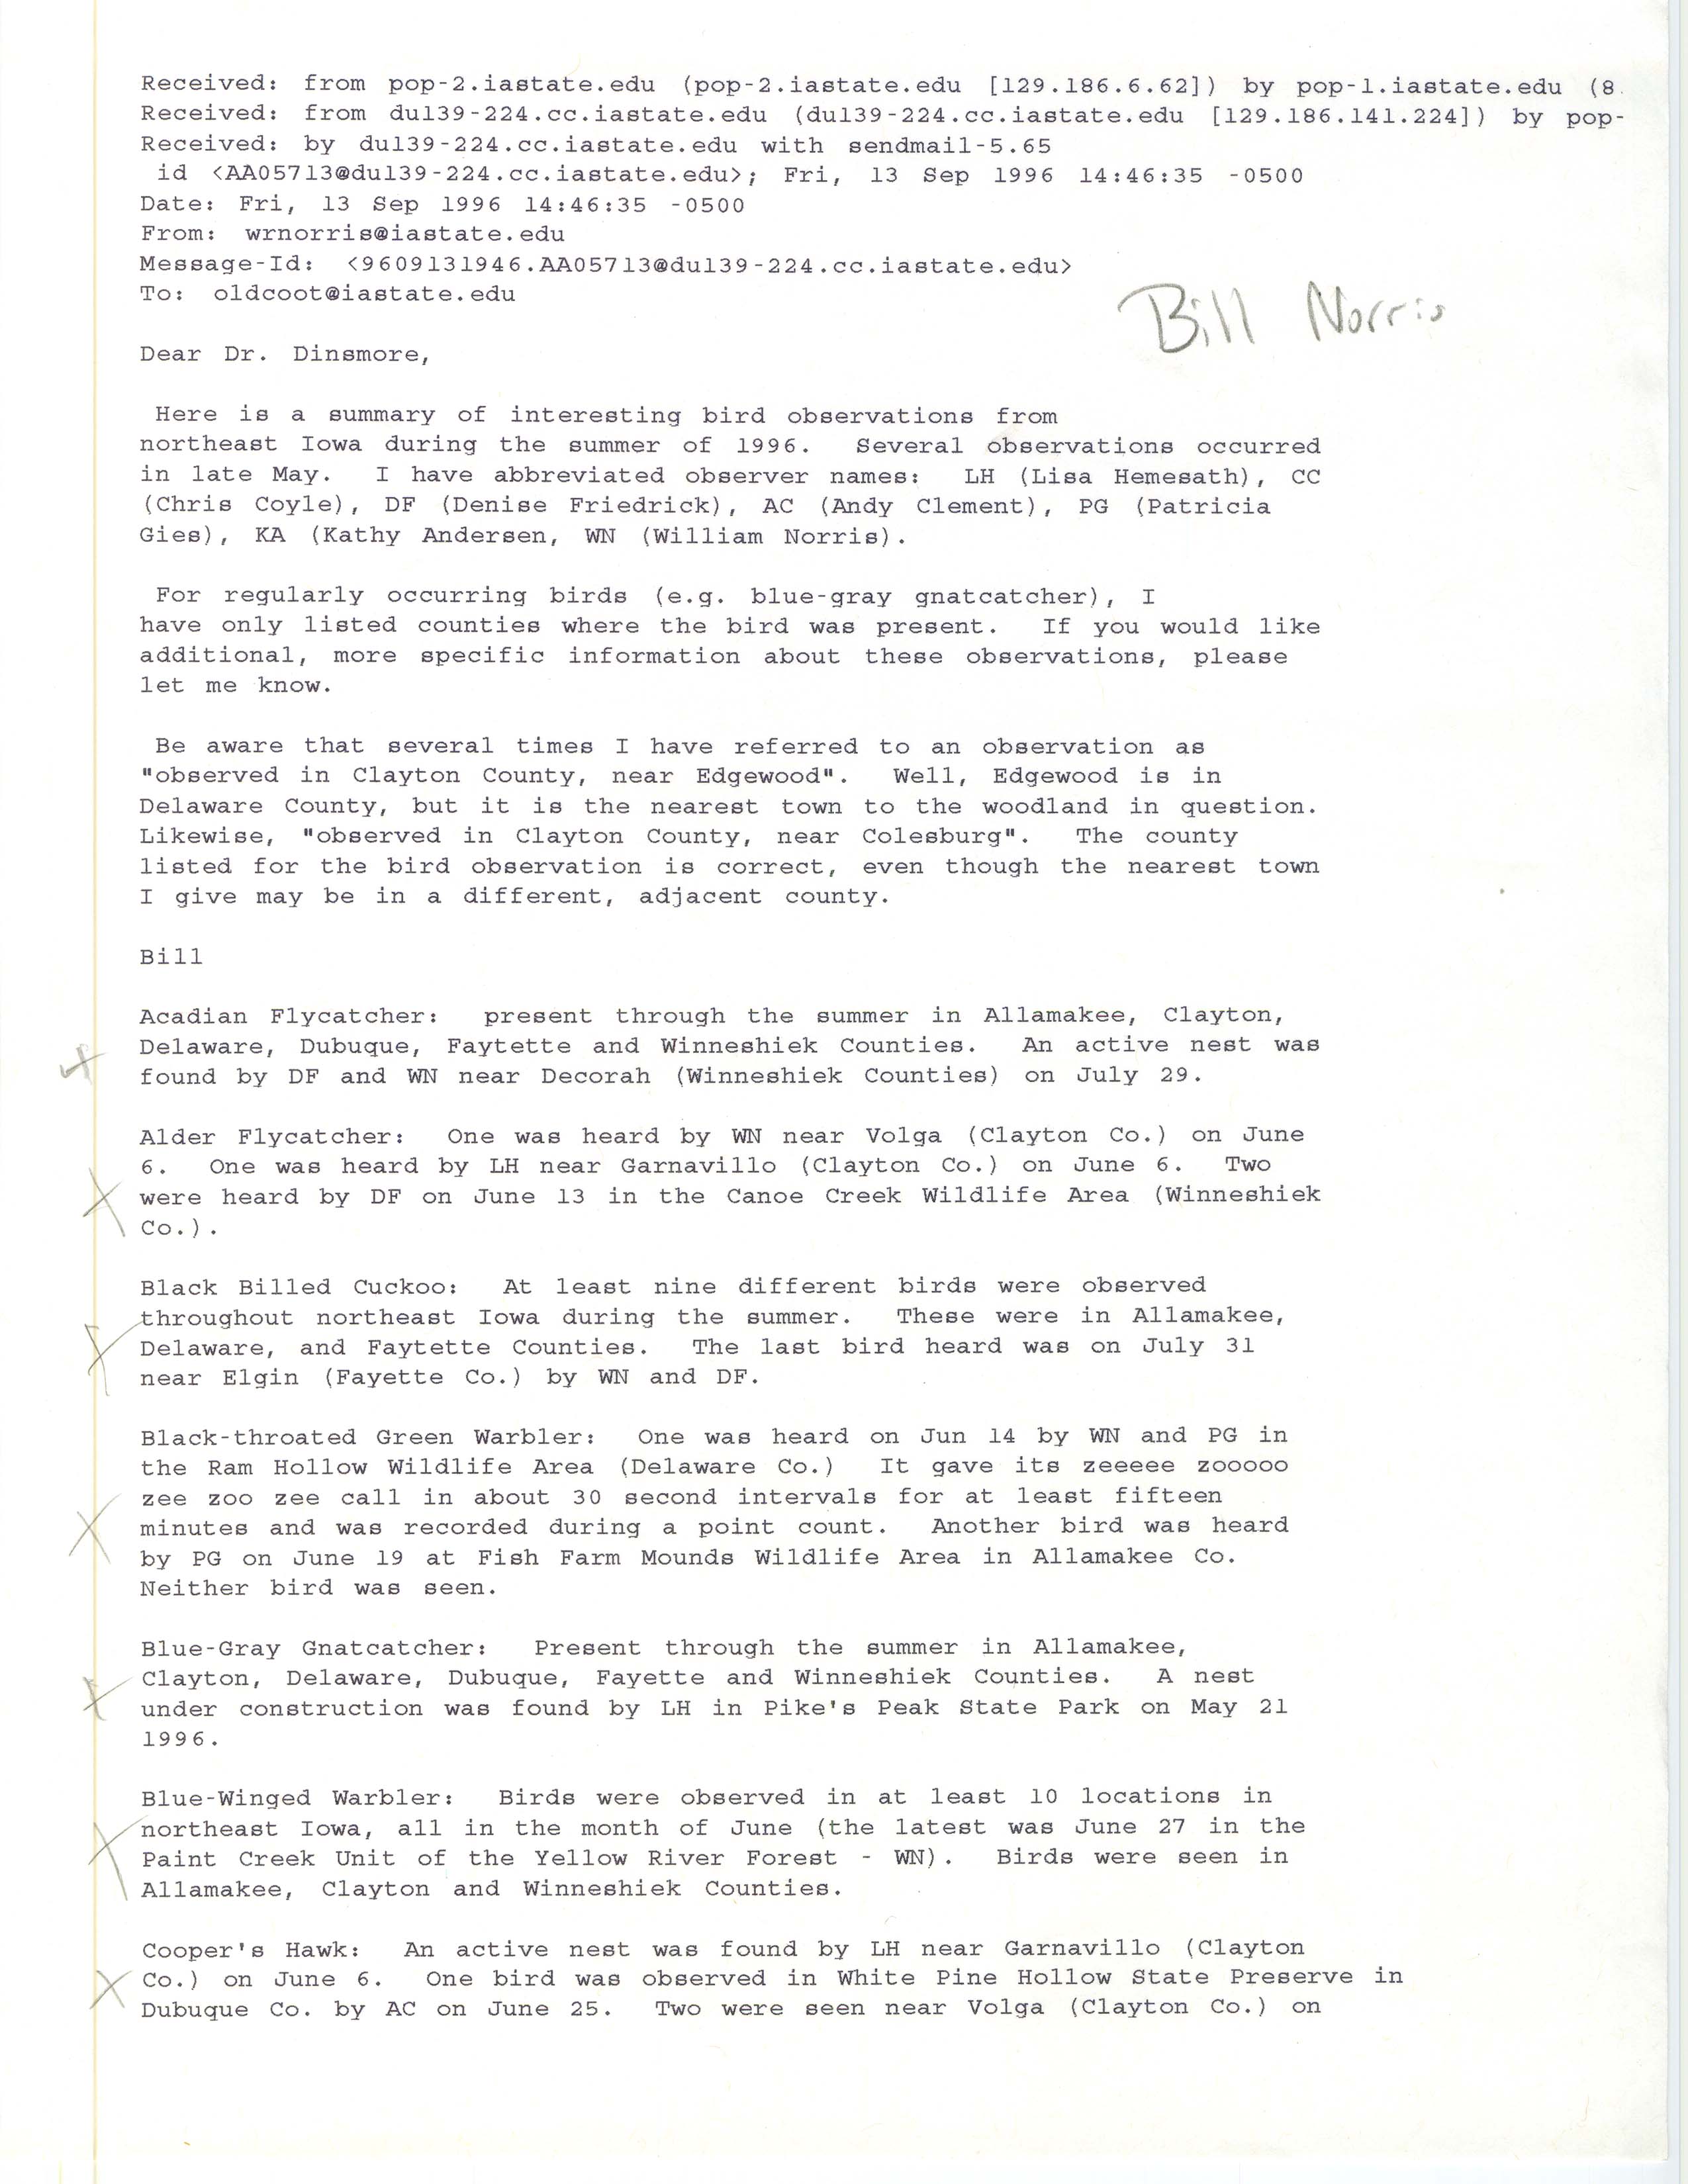 Field notes and Bill Norris email to James J. Dinsmore, September 13, 1996